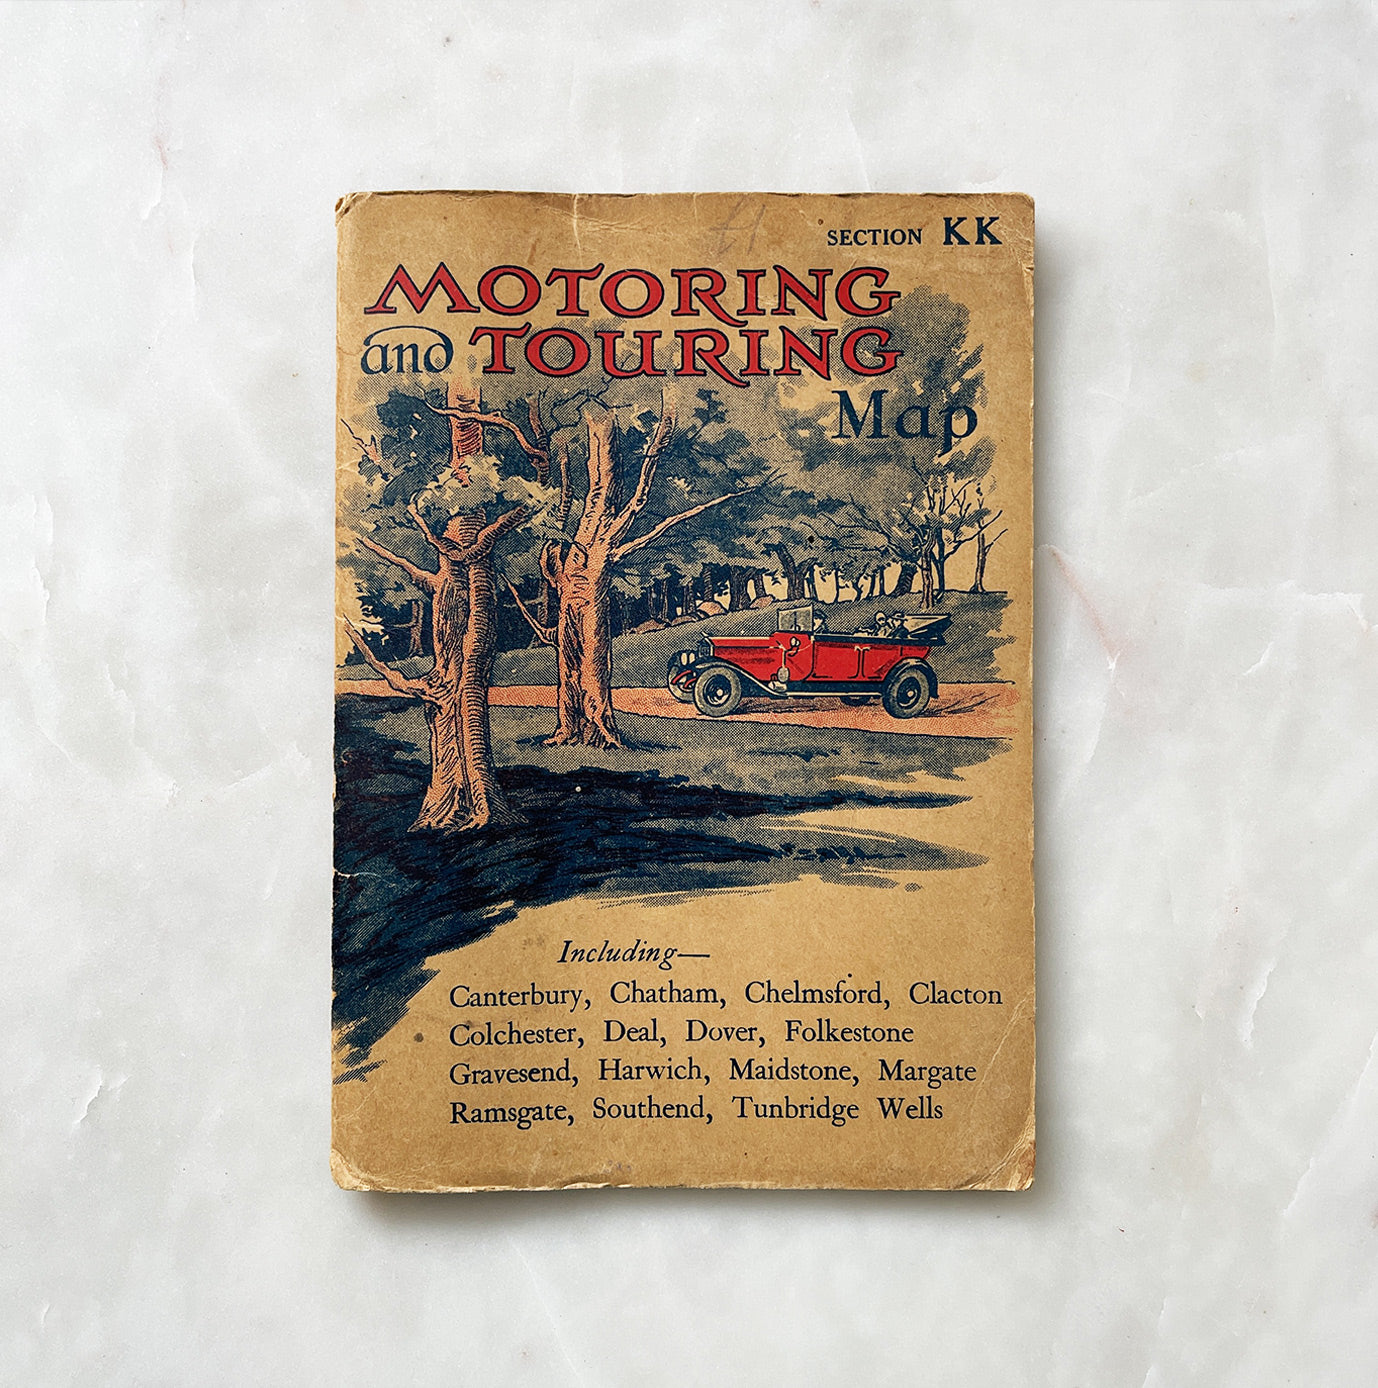 A 1930s 'Motoring & Touring Map' for the South East of England. The cover has a great illustration of a vintage car parked up in the woods. The map covers North Essex down to the South Coast showing all 'First Class Roads' and is in fantastic condition - SHOP NOW - www.intovintage.co.uk